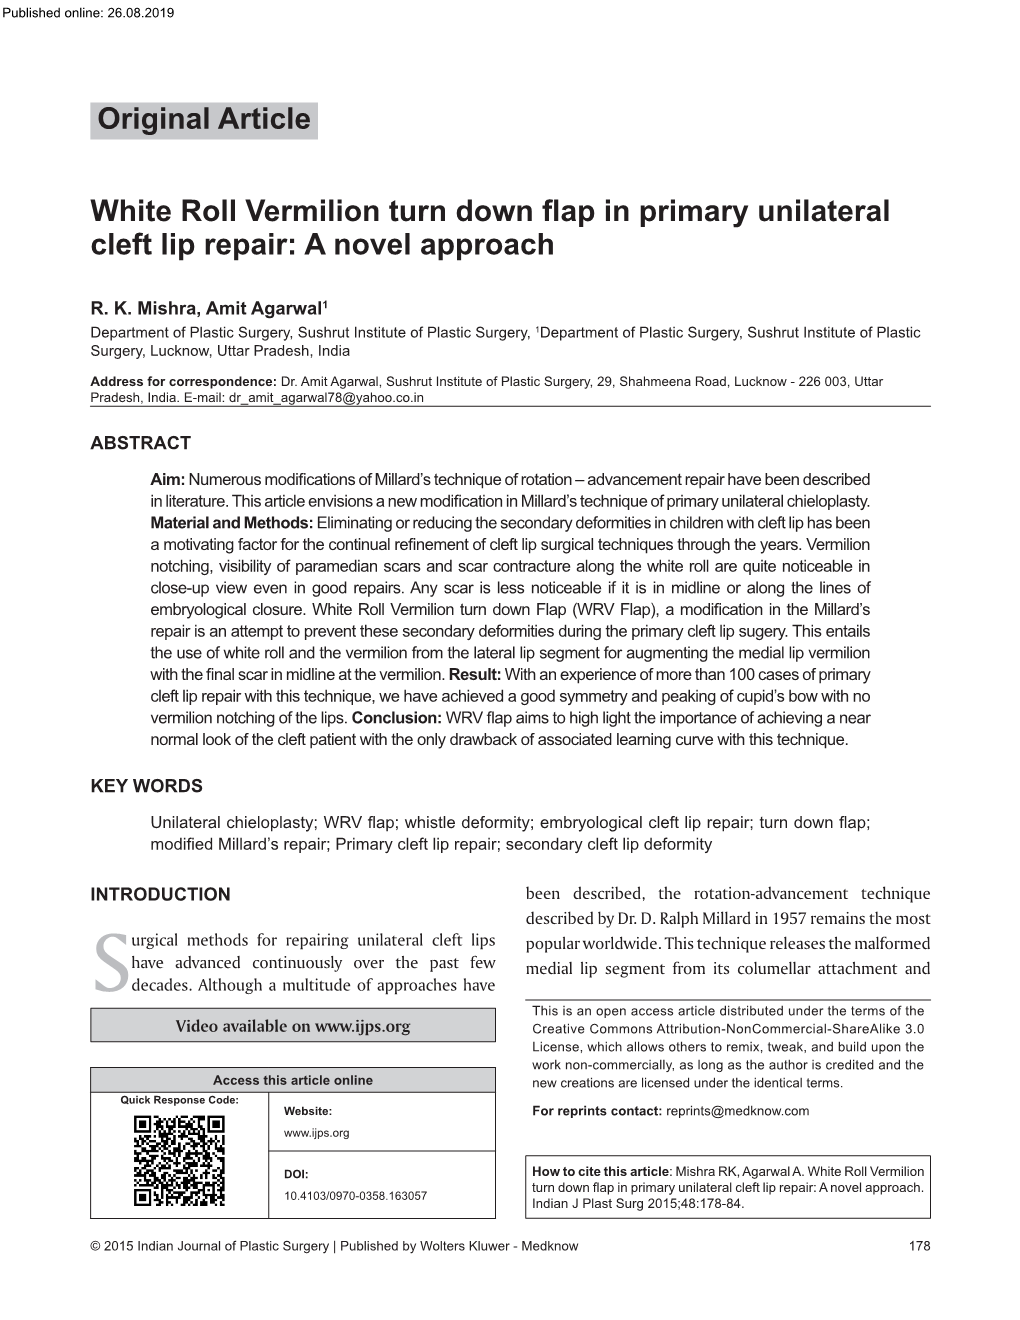 Original Article White Roll Vermilion Turn Down Flap in Primary Unilateral